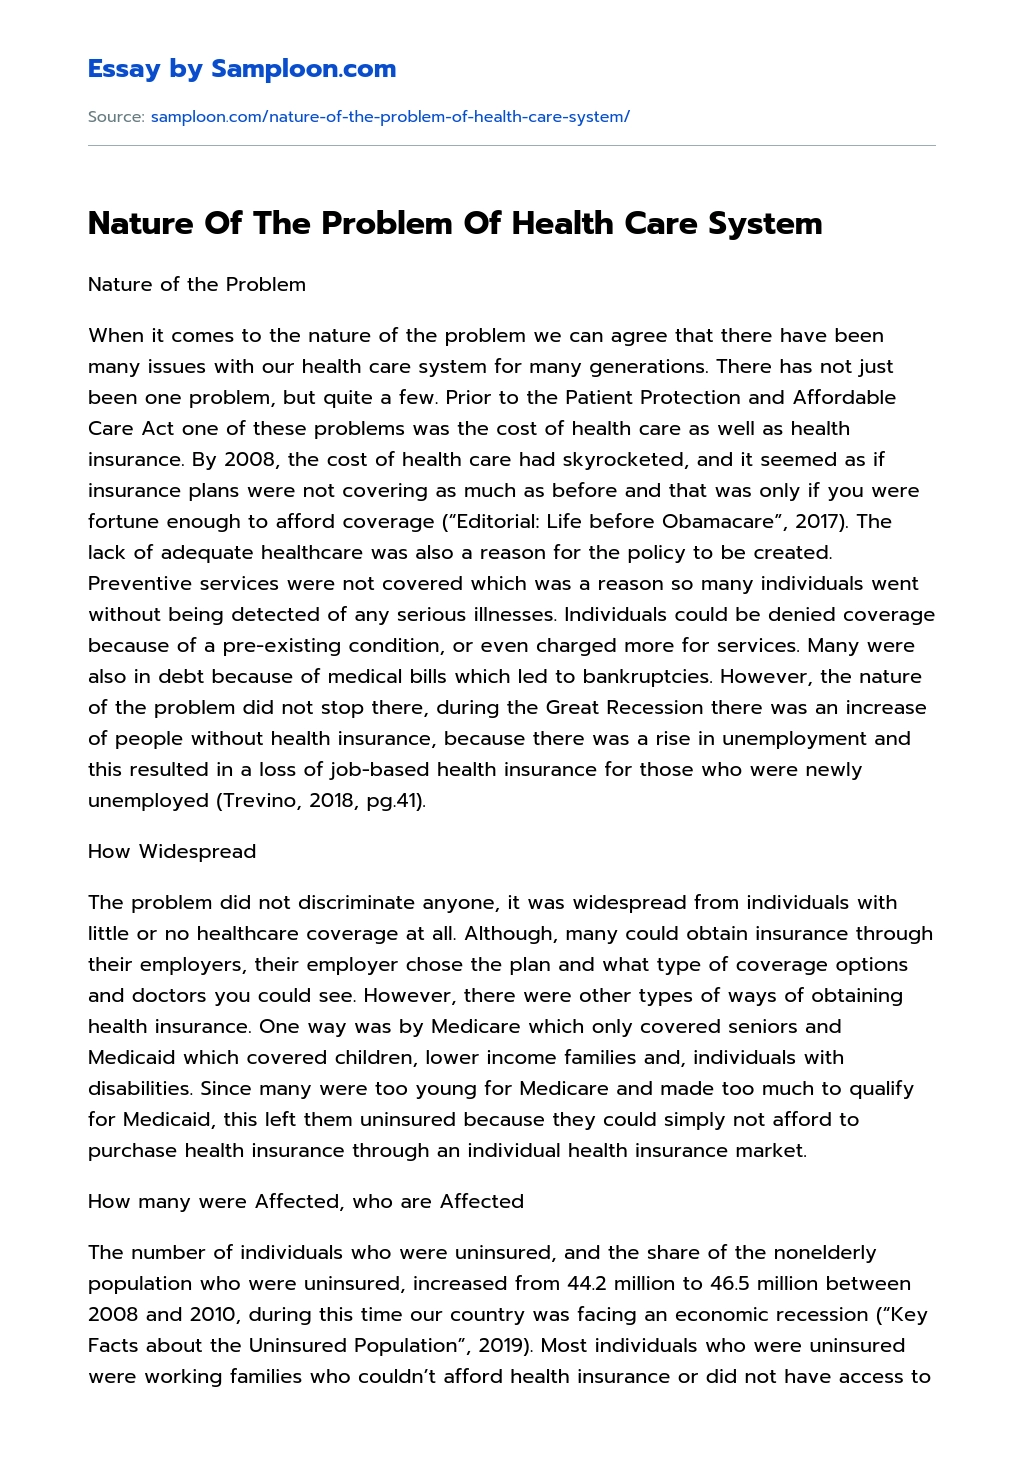 Nature Of The Problem Of Health Care System essay